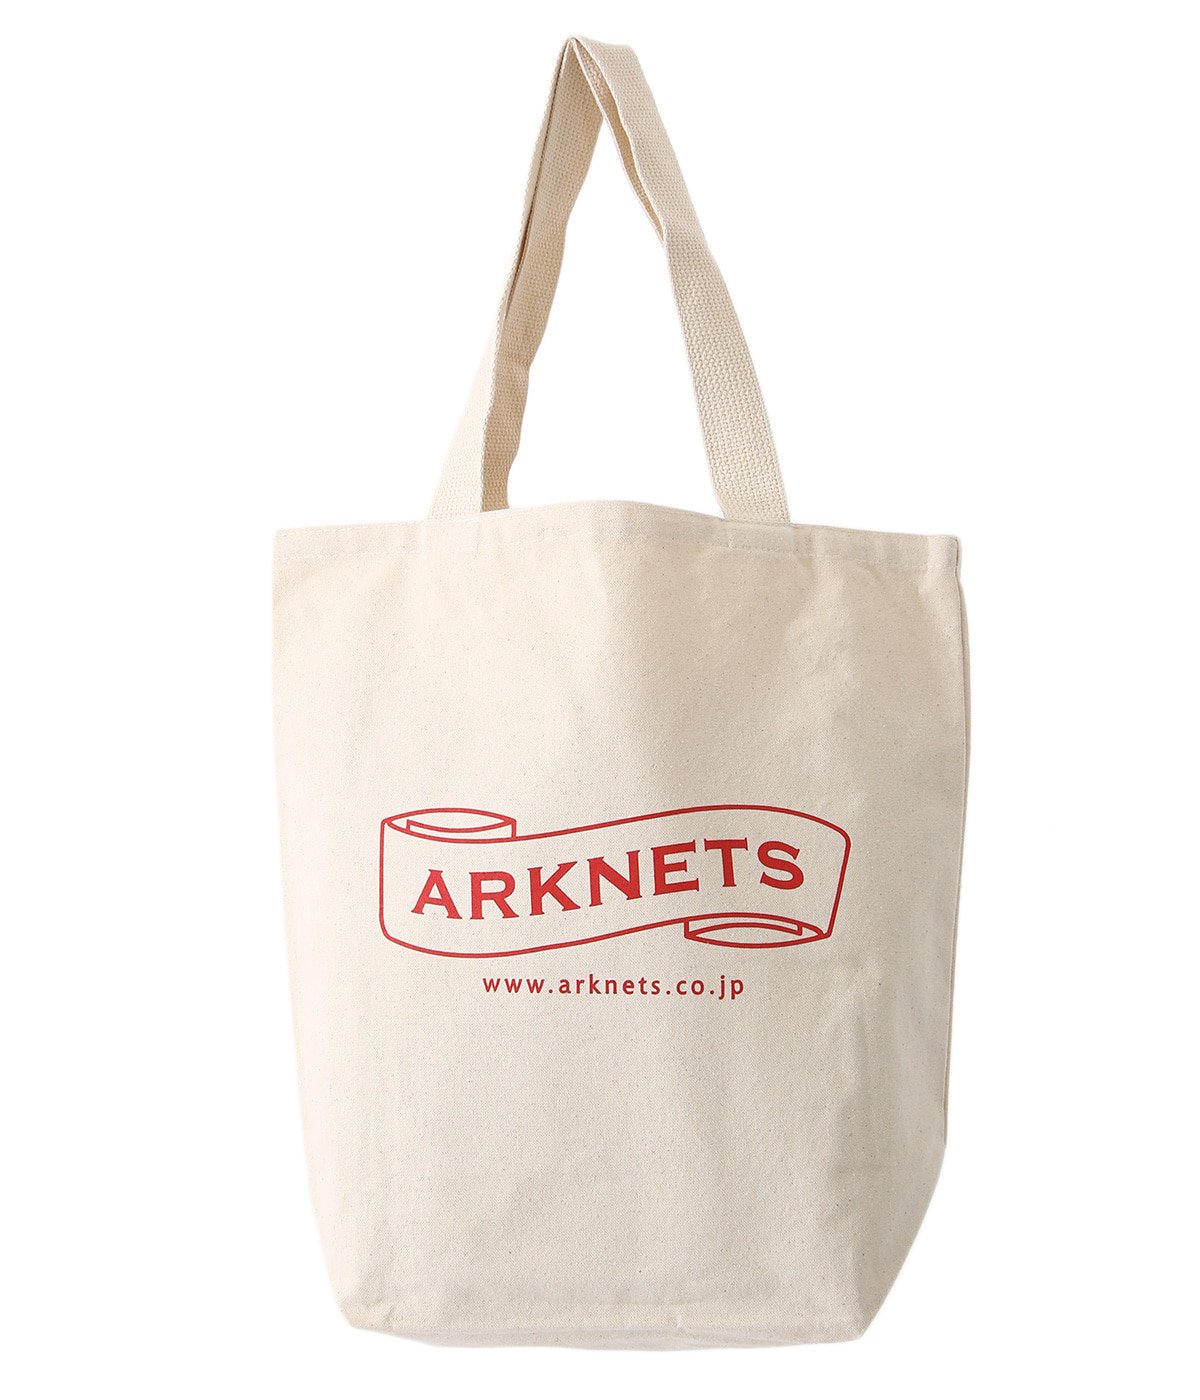 USA CANVAS ARKNETS TOTE M